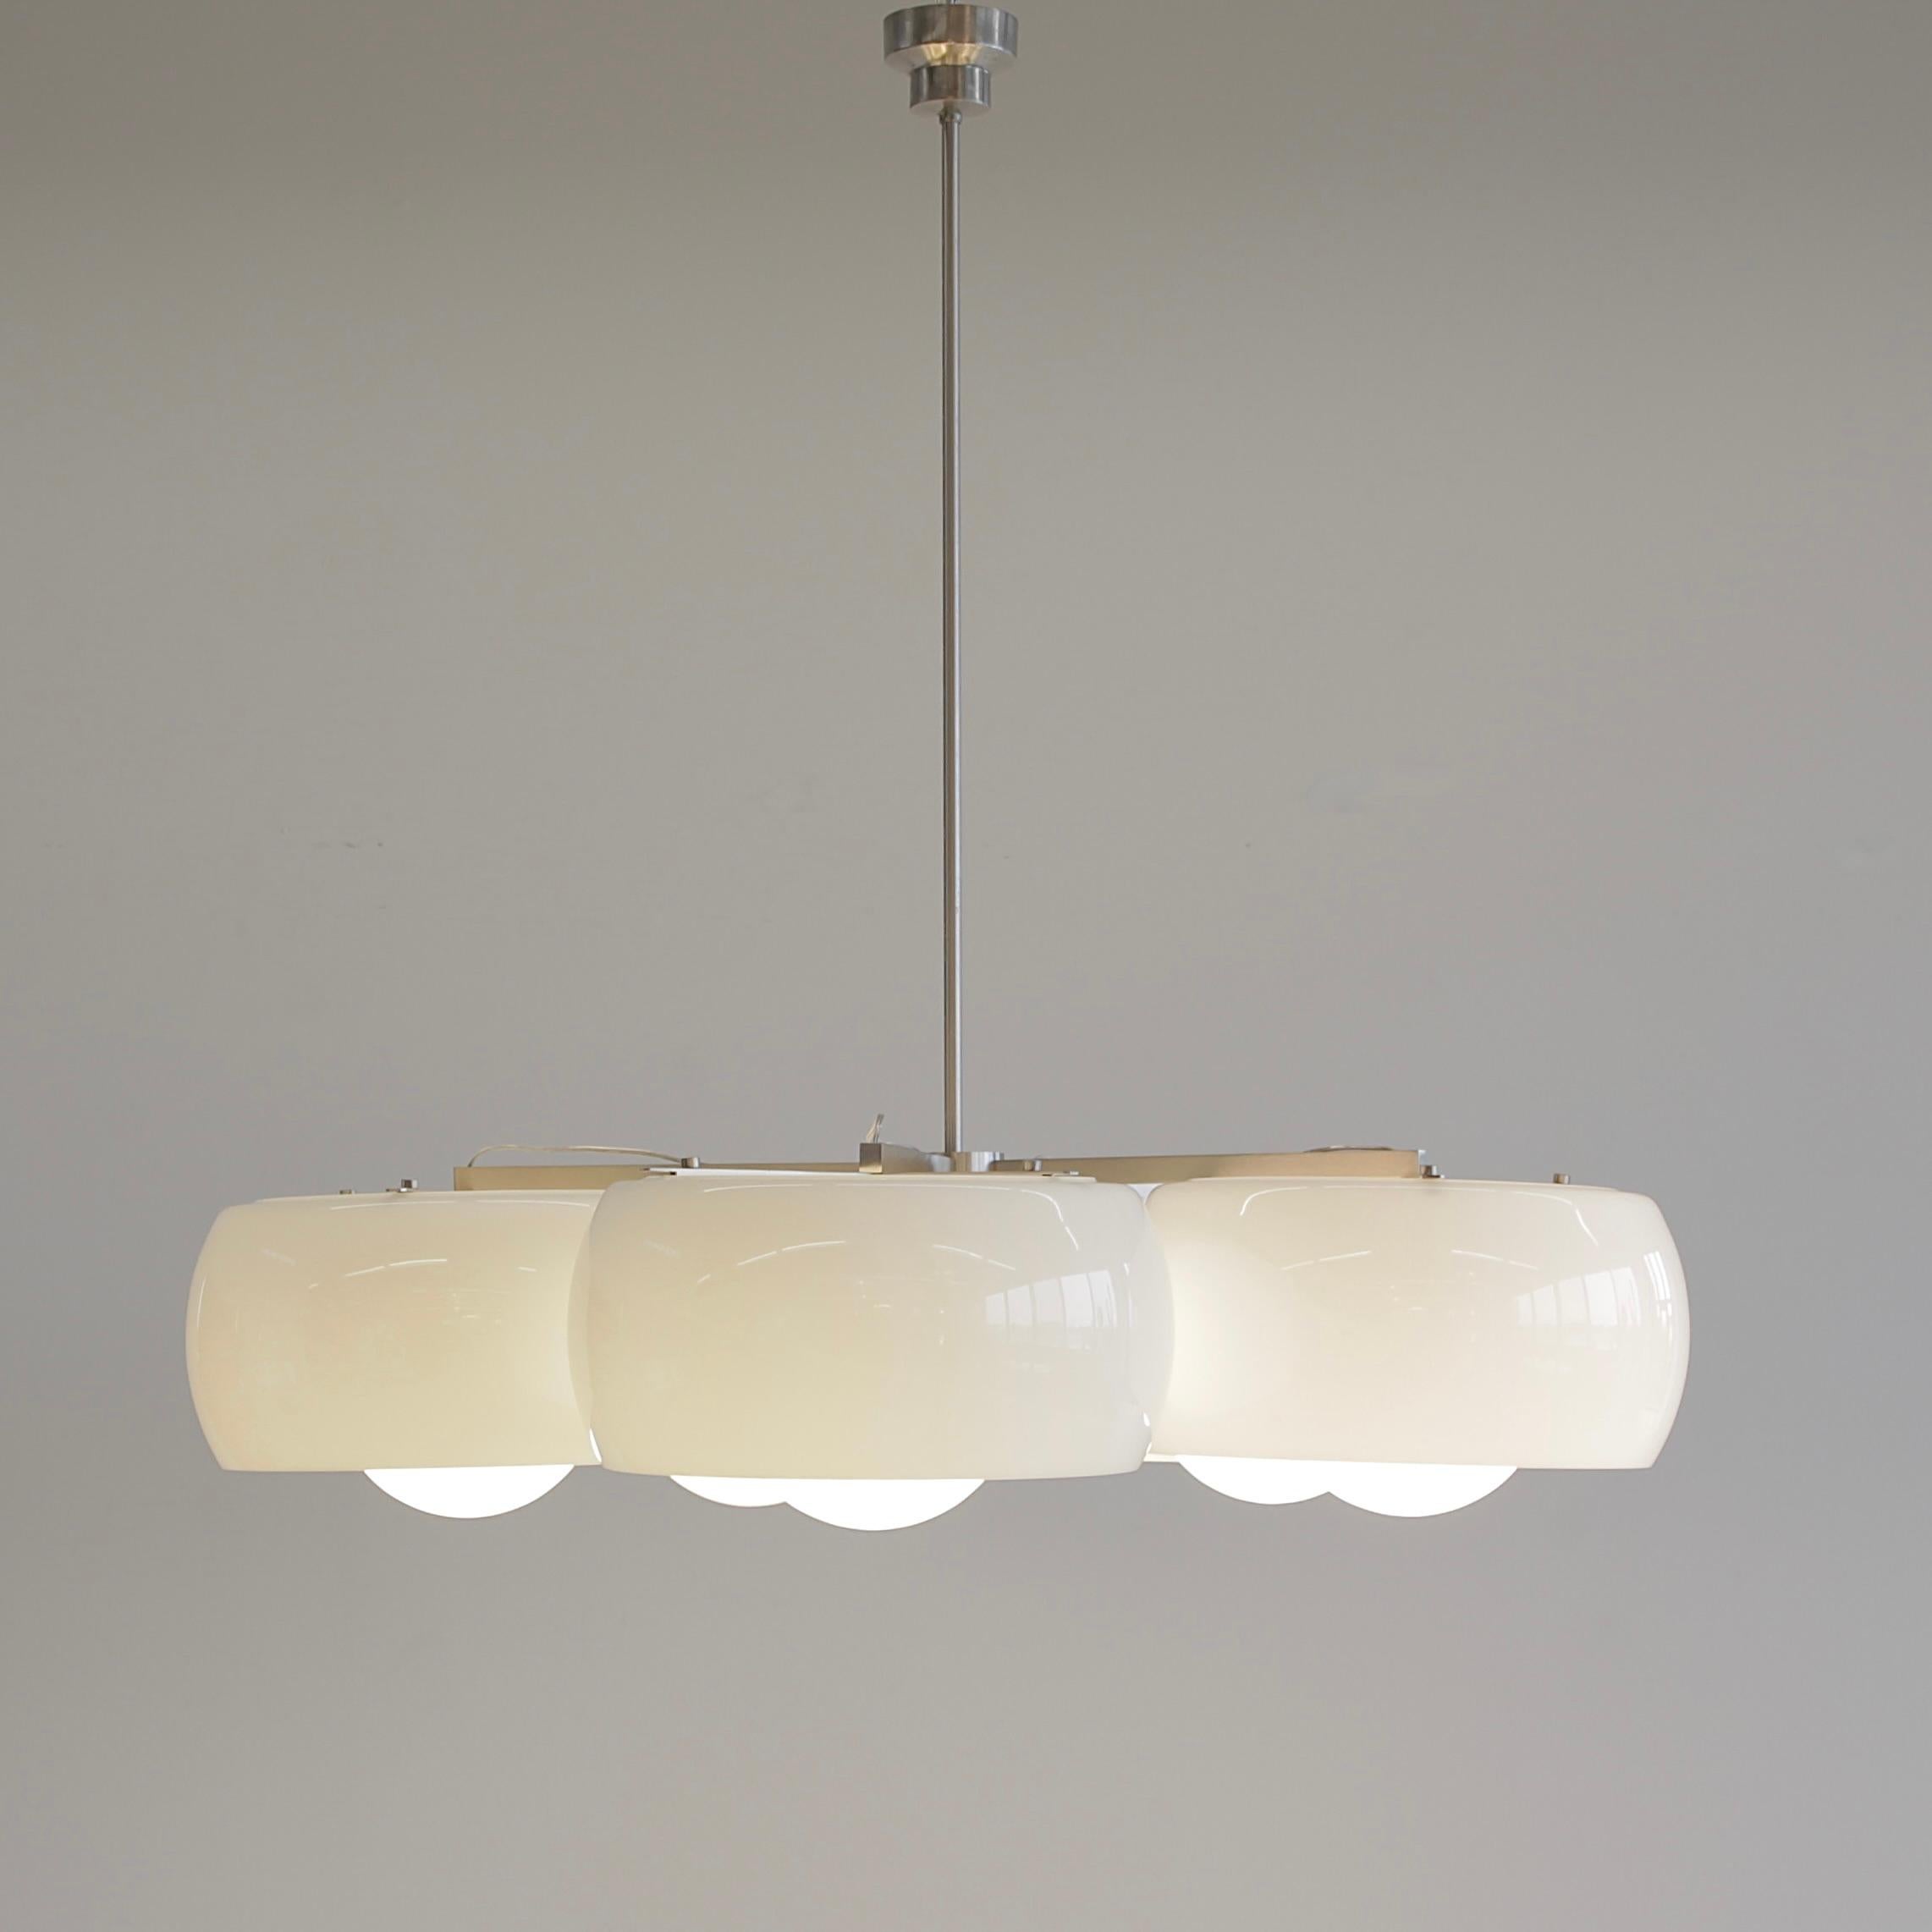 Ceiling lamp, designed by Vico Magistretti in 1961. Italy, Artemide.
The 'Pentaclinio' ceiling lamp by Magistretti, uses 5 double diffuser glass shades. Opaline glass pieces and brushed metal structure. AMAZING!

Please note: All lighting fixtures